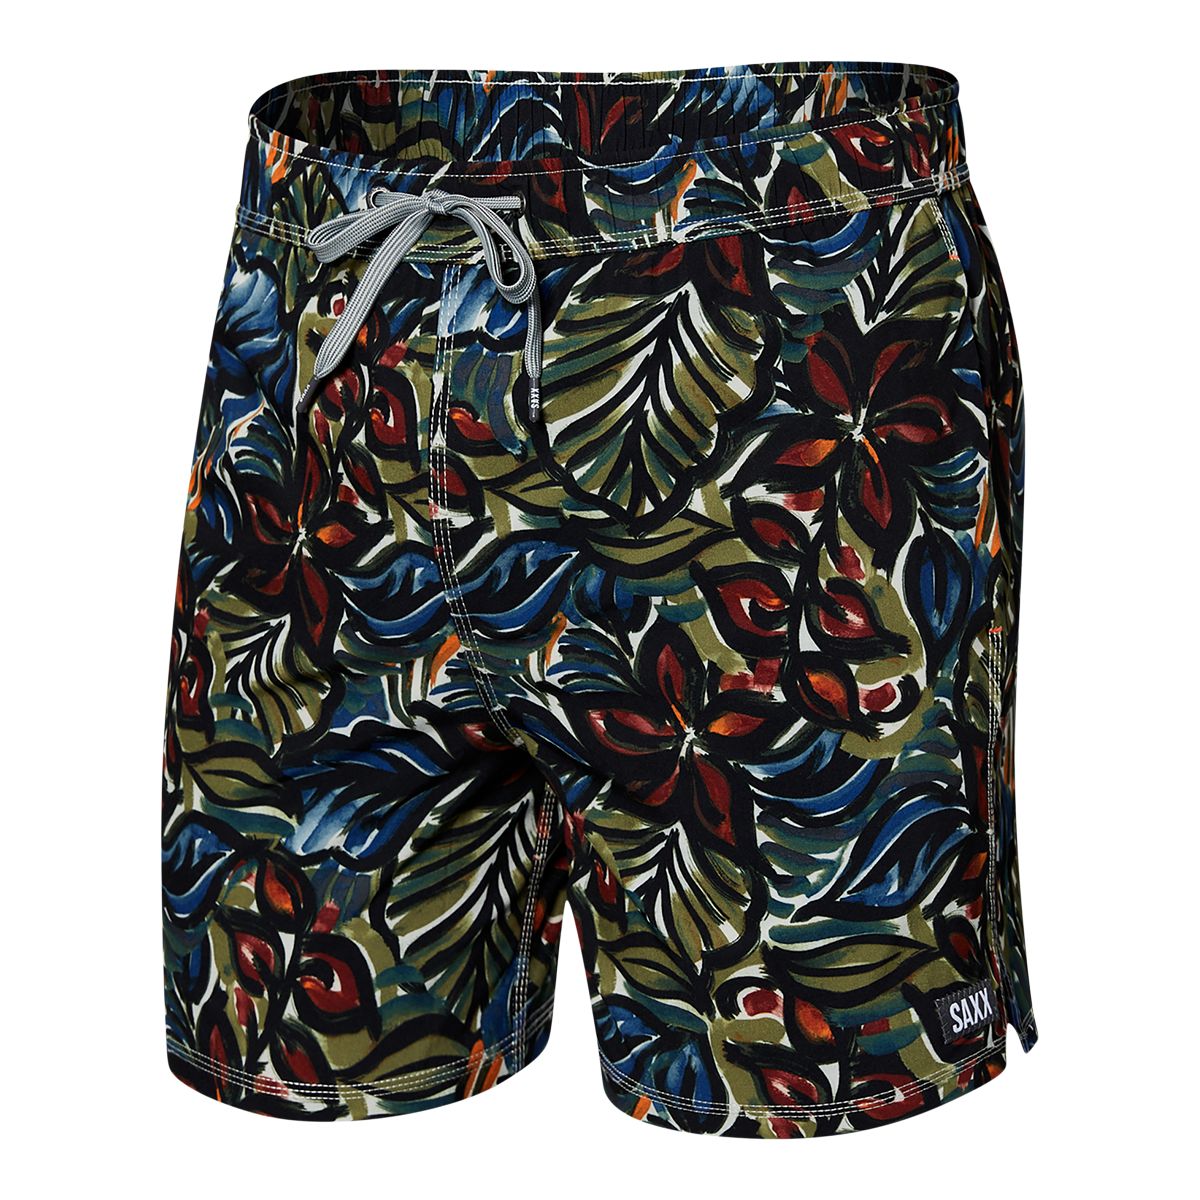 Saxx Men's Oh Buoy 2 in 1 Swim Volley Shorts, 5